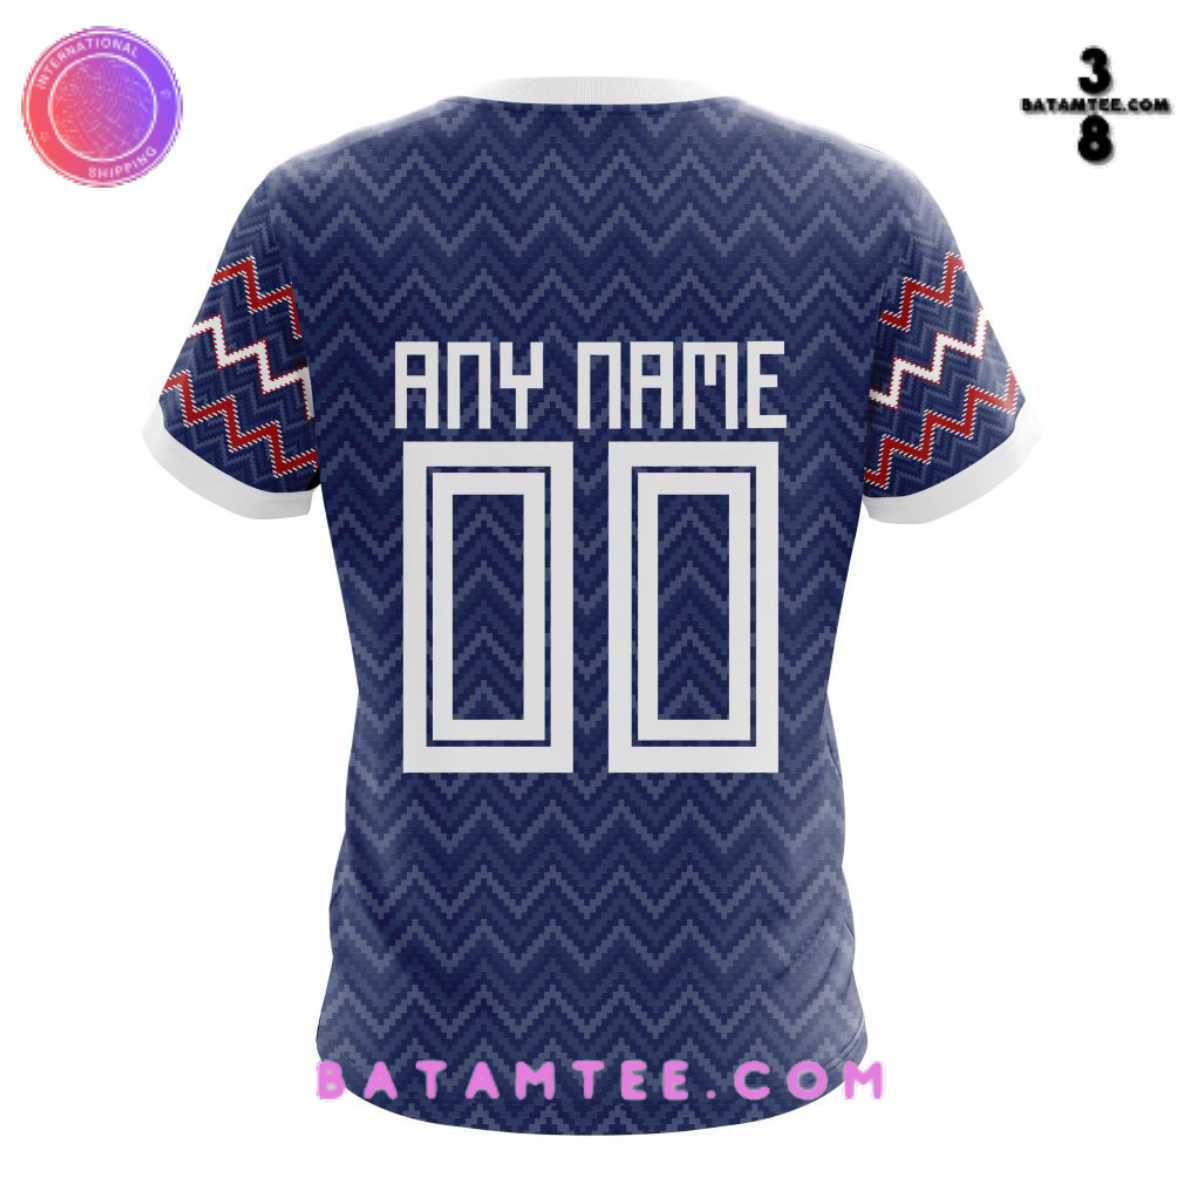 Liga MX Pumas UNAM Specialized Team Jersey With Maya Personalized T-Shirts's Overview - Batamtee Shop - Threads & Totes: Your Style Destination